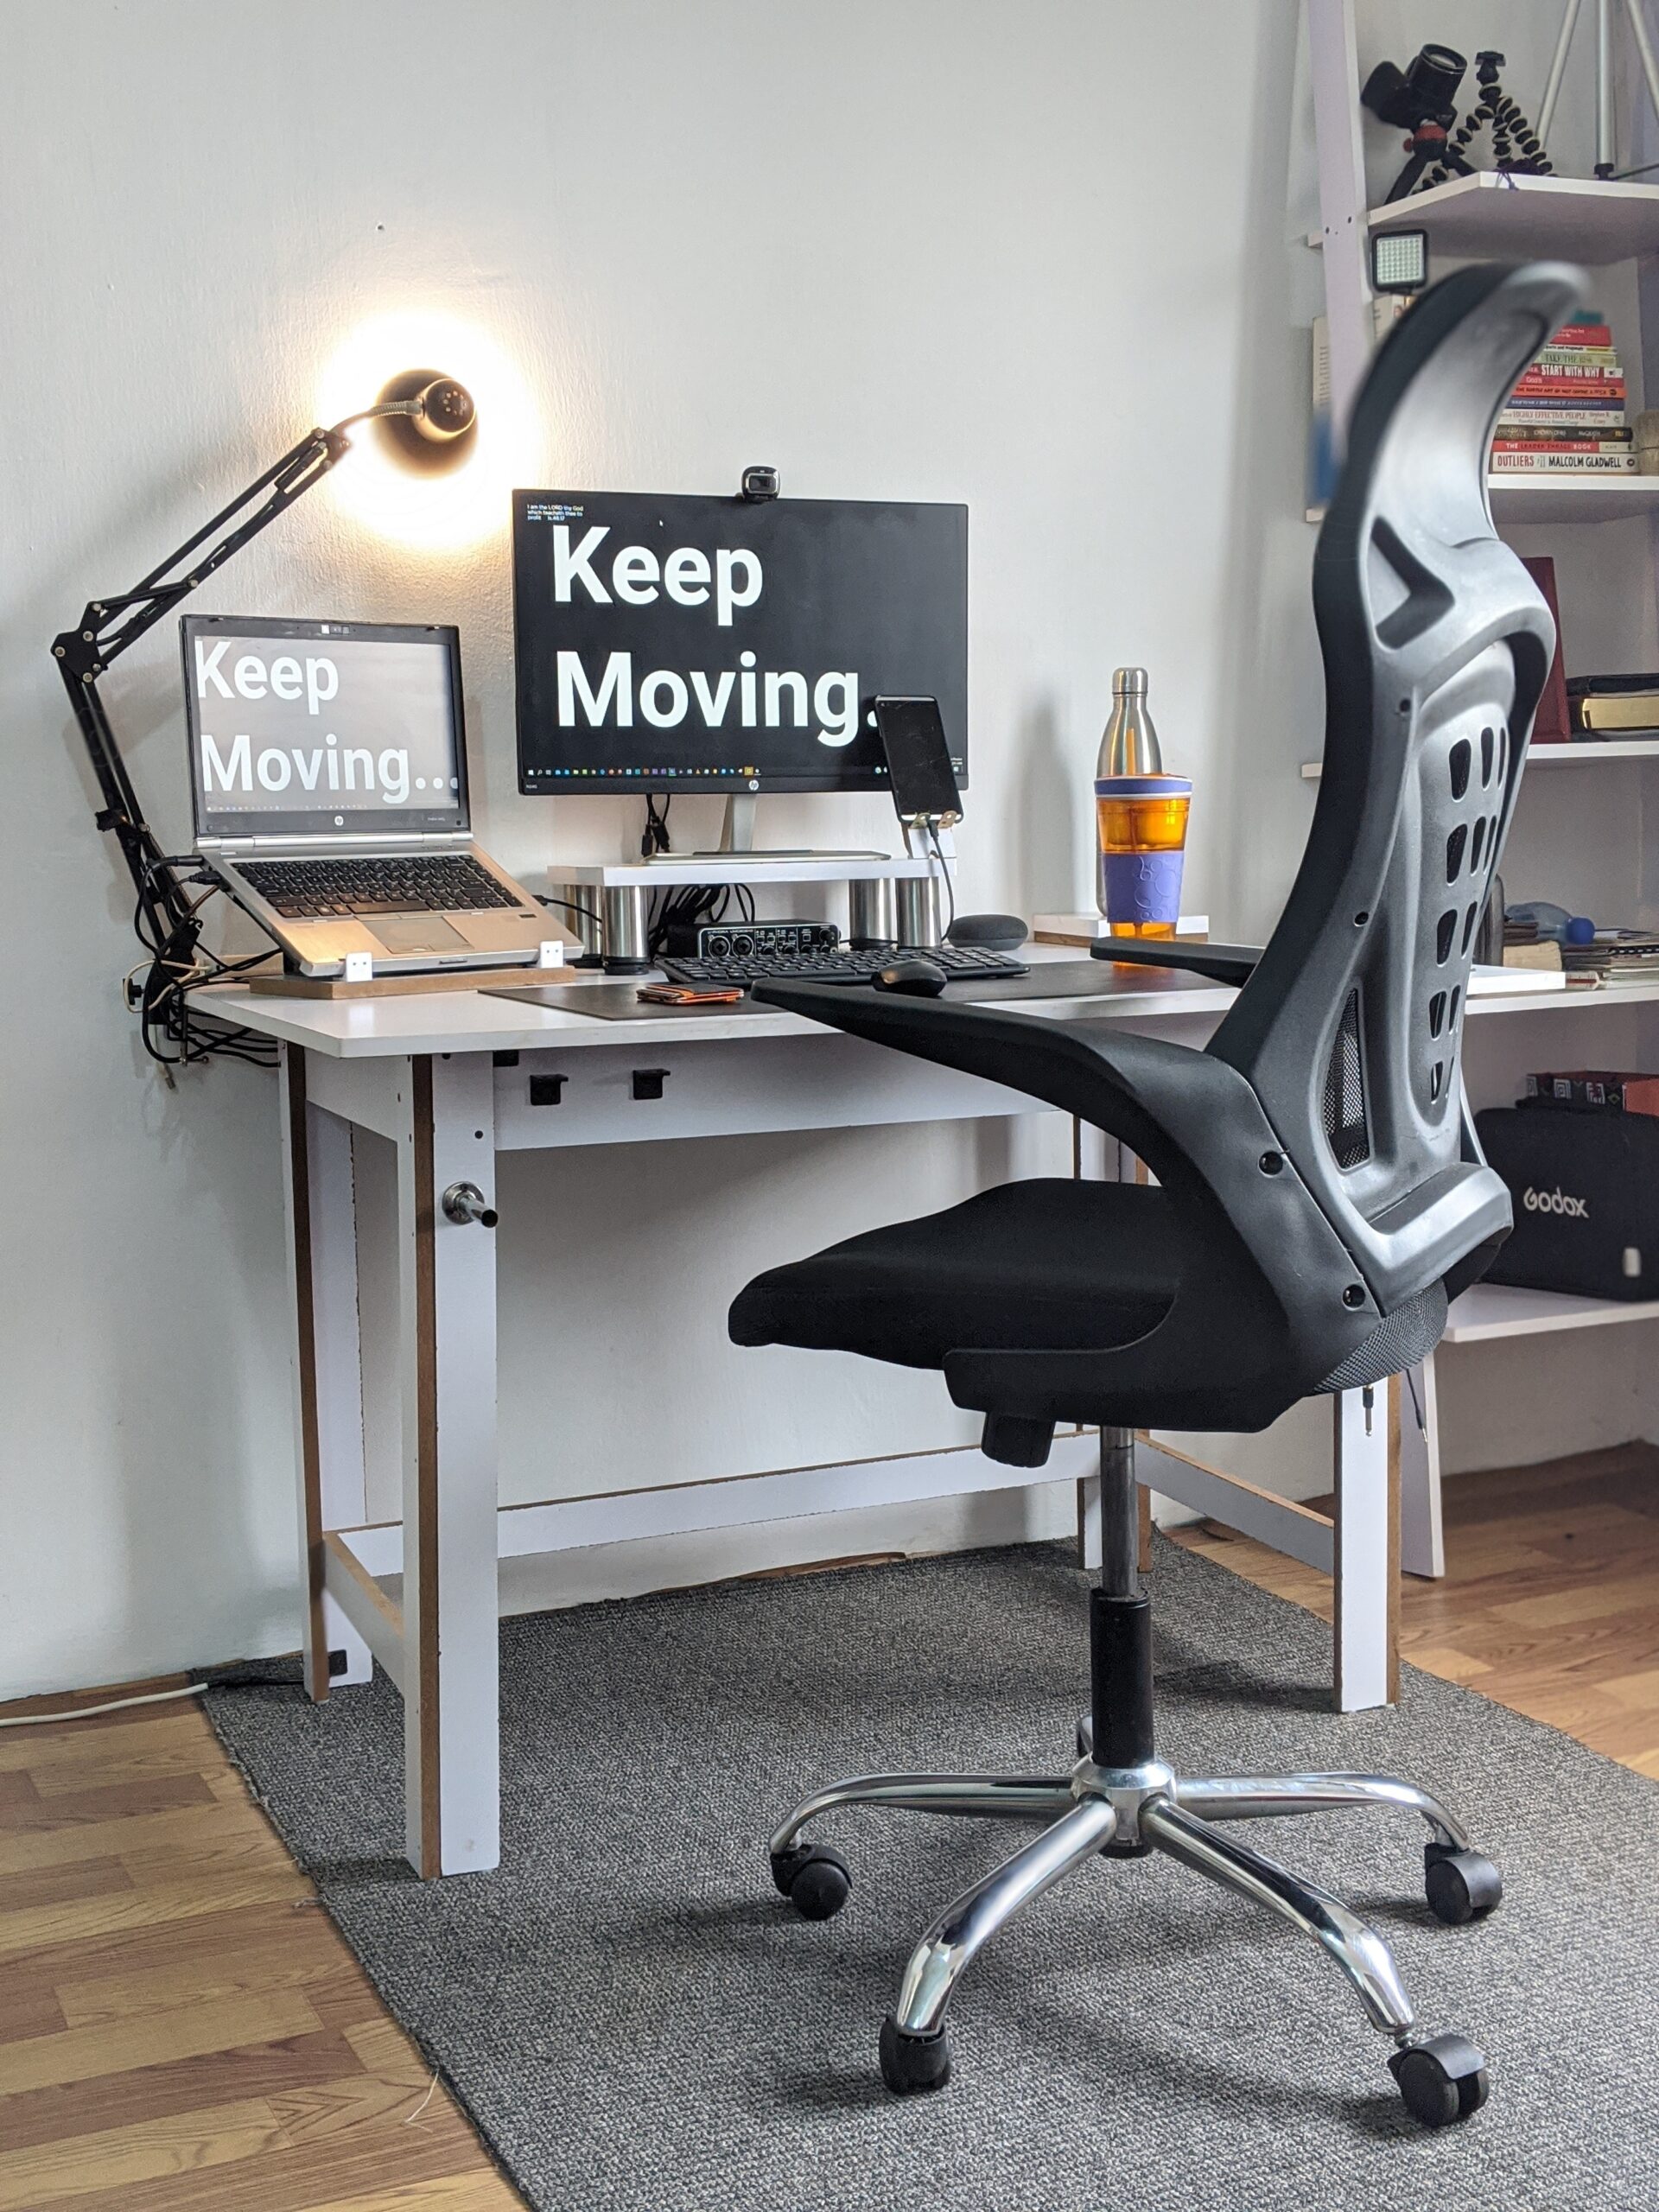 An ergonomic chair in a home office